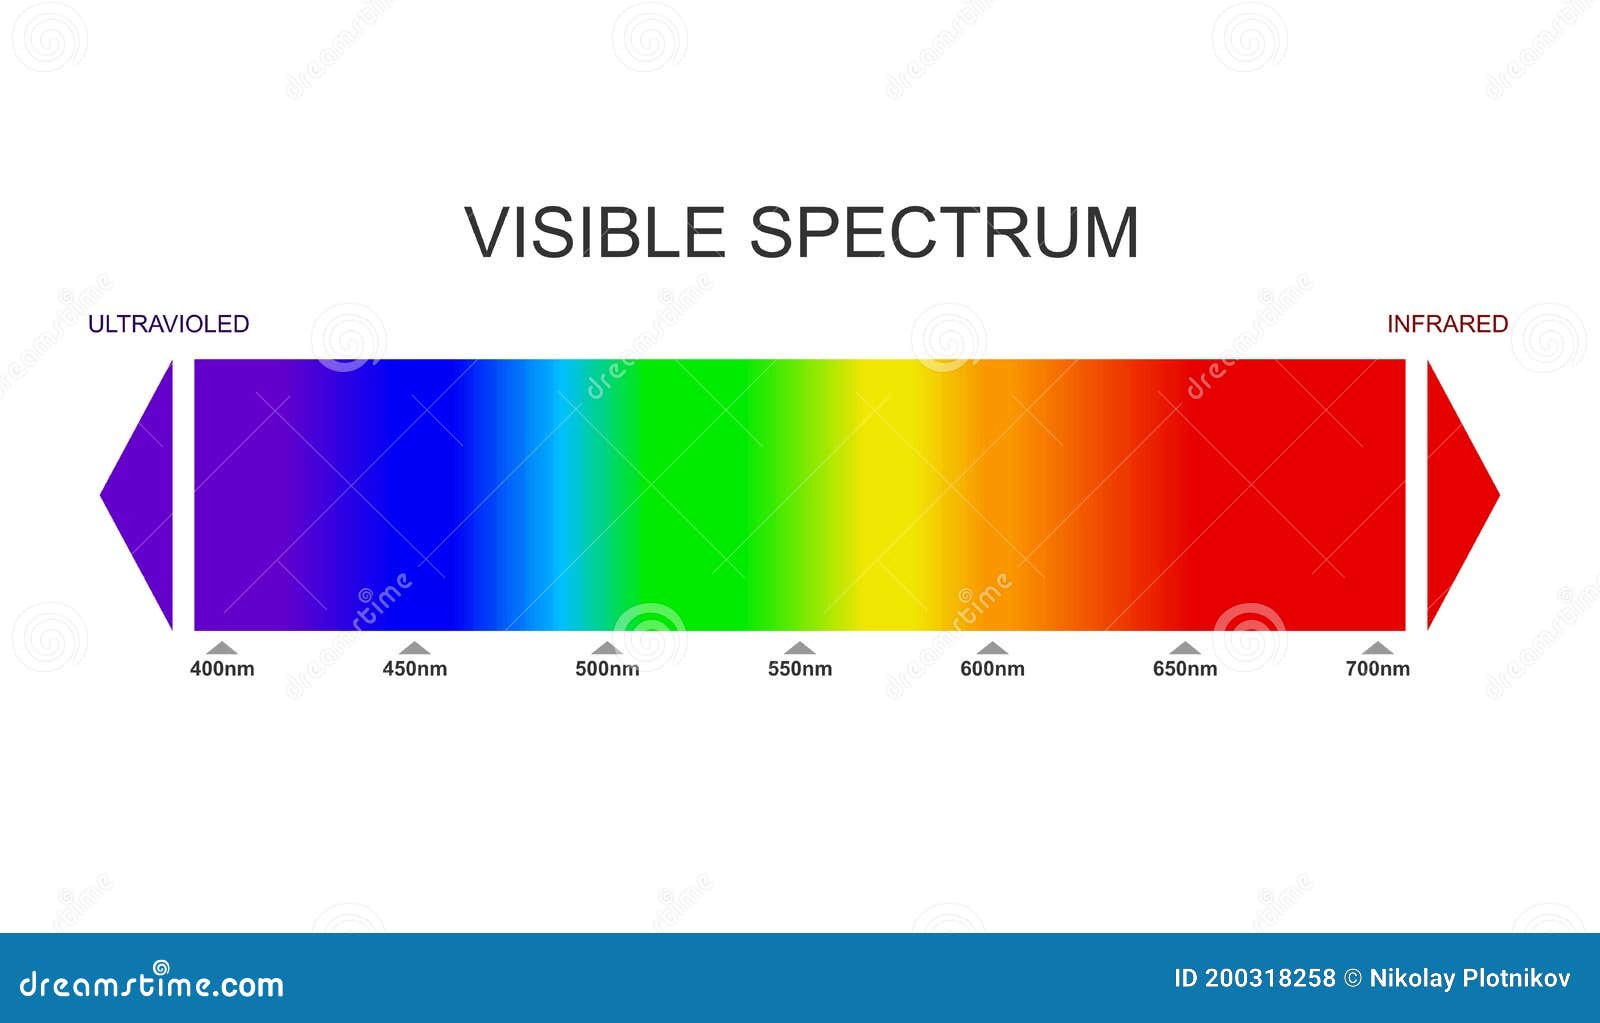 spectrum-visible-light-infrared-and-ultraviolet-electromagnetic